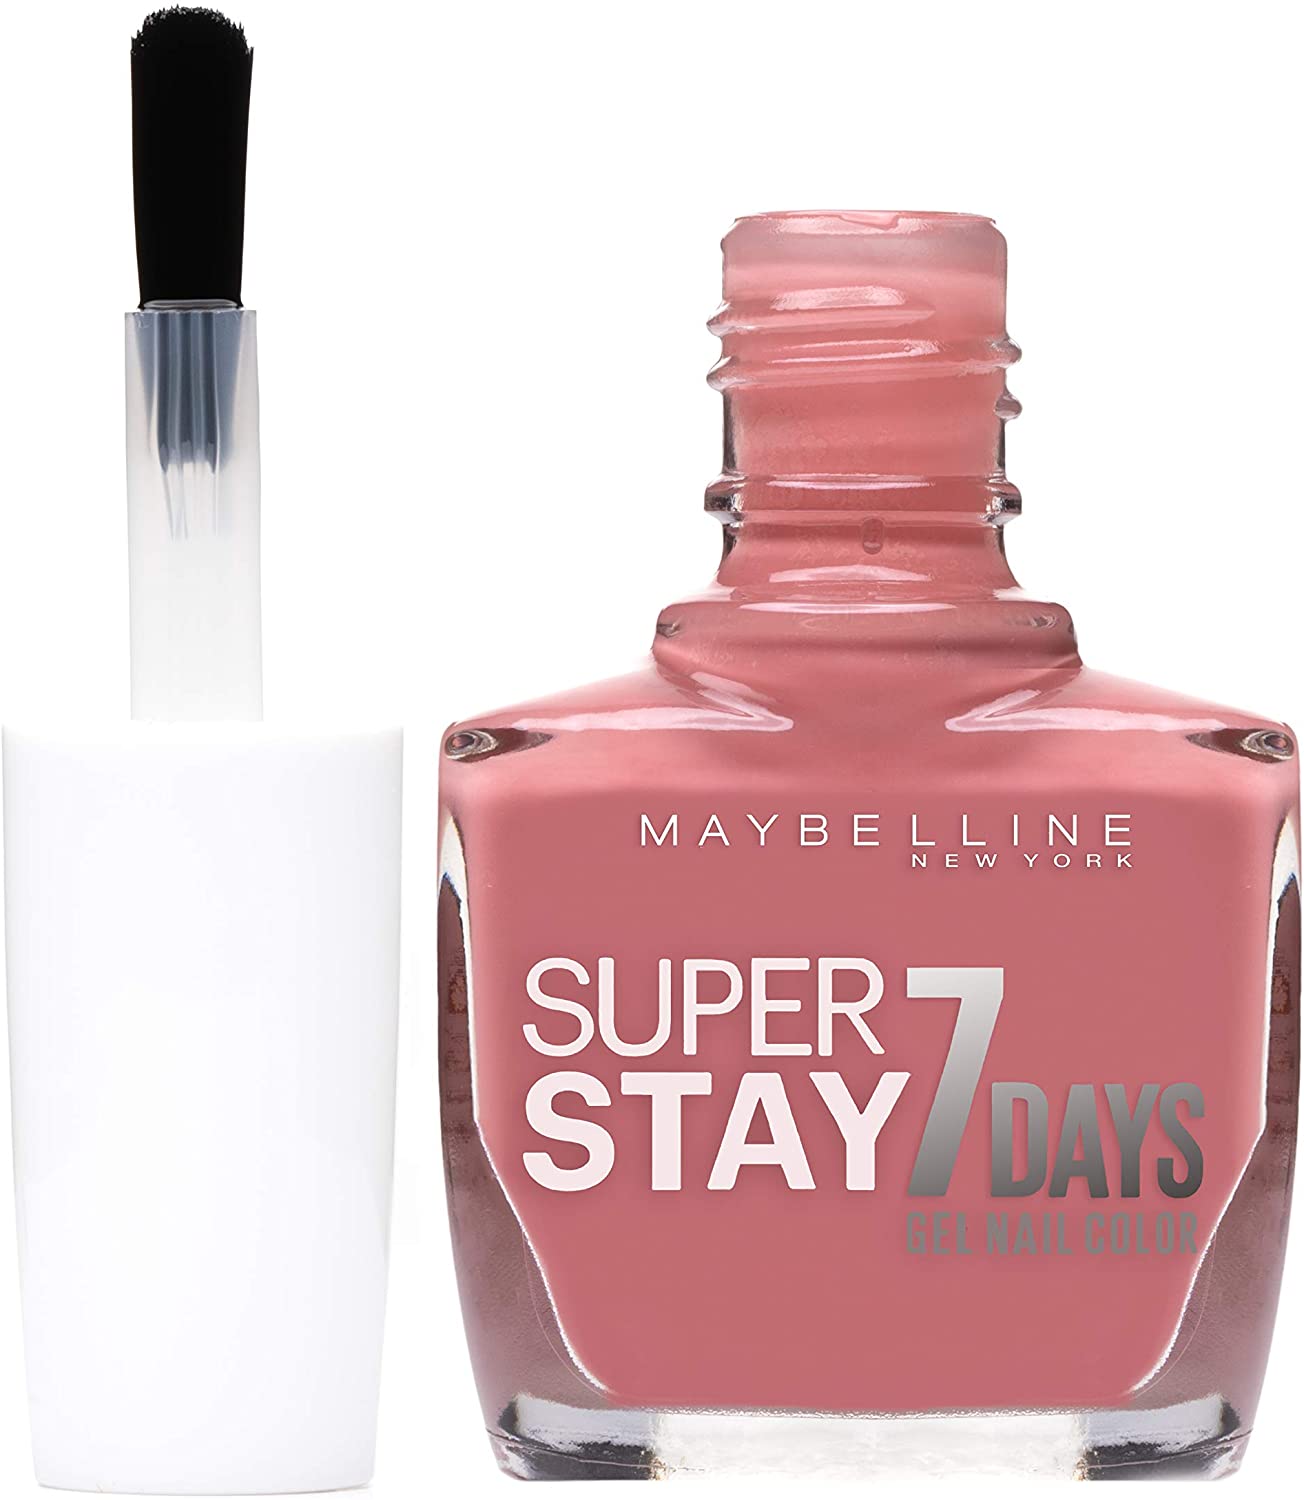 Gel Days Super Dusted Pearl Nail Maybelline 7 Stay Polish -